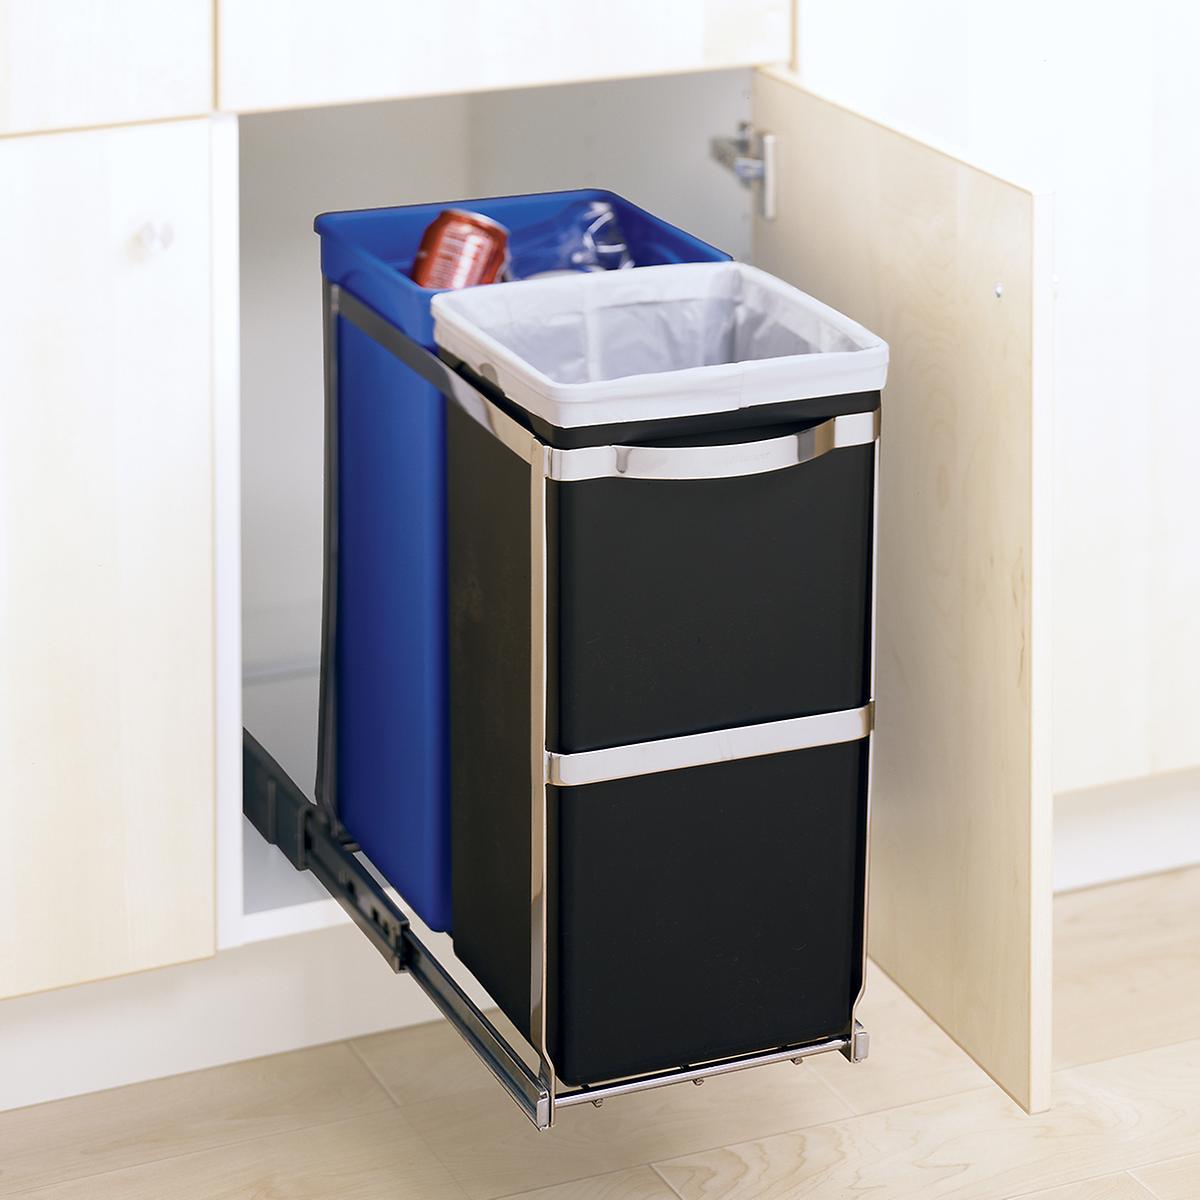 Simplehuman 9 2 Gal 2 Bin Pull Out Recycle Bin The Container Store